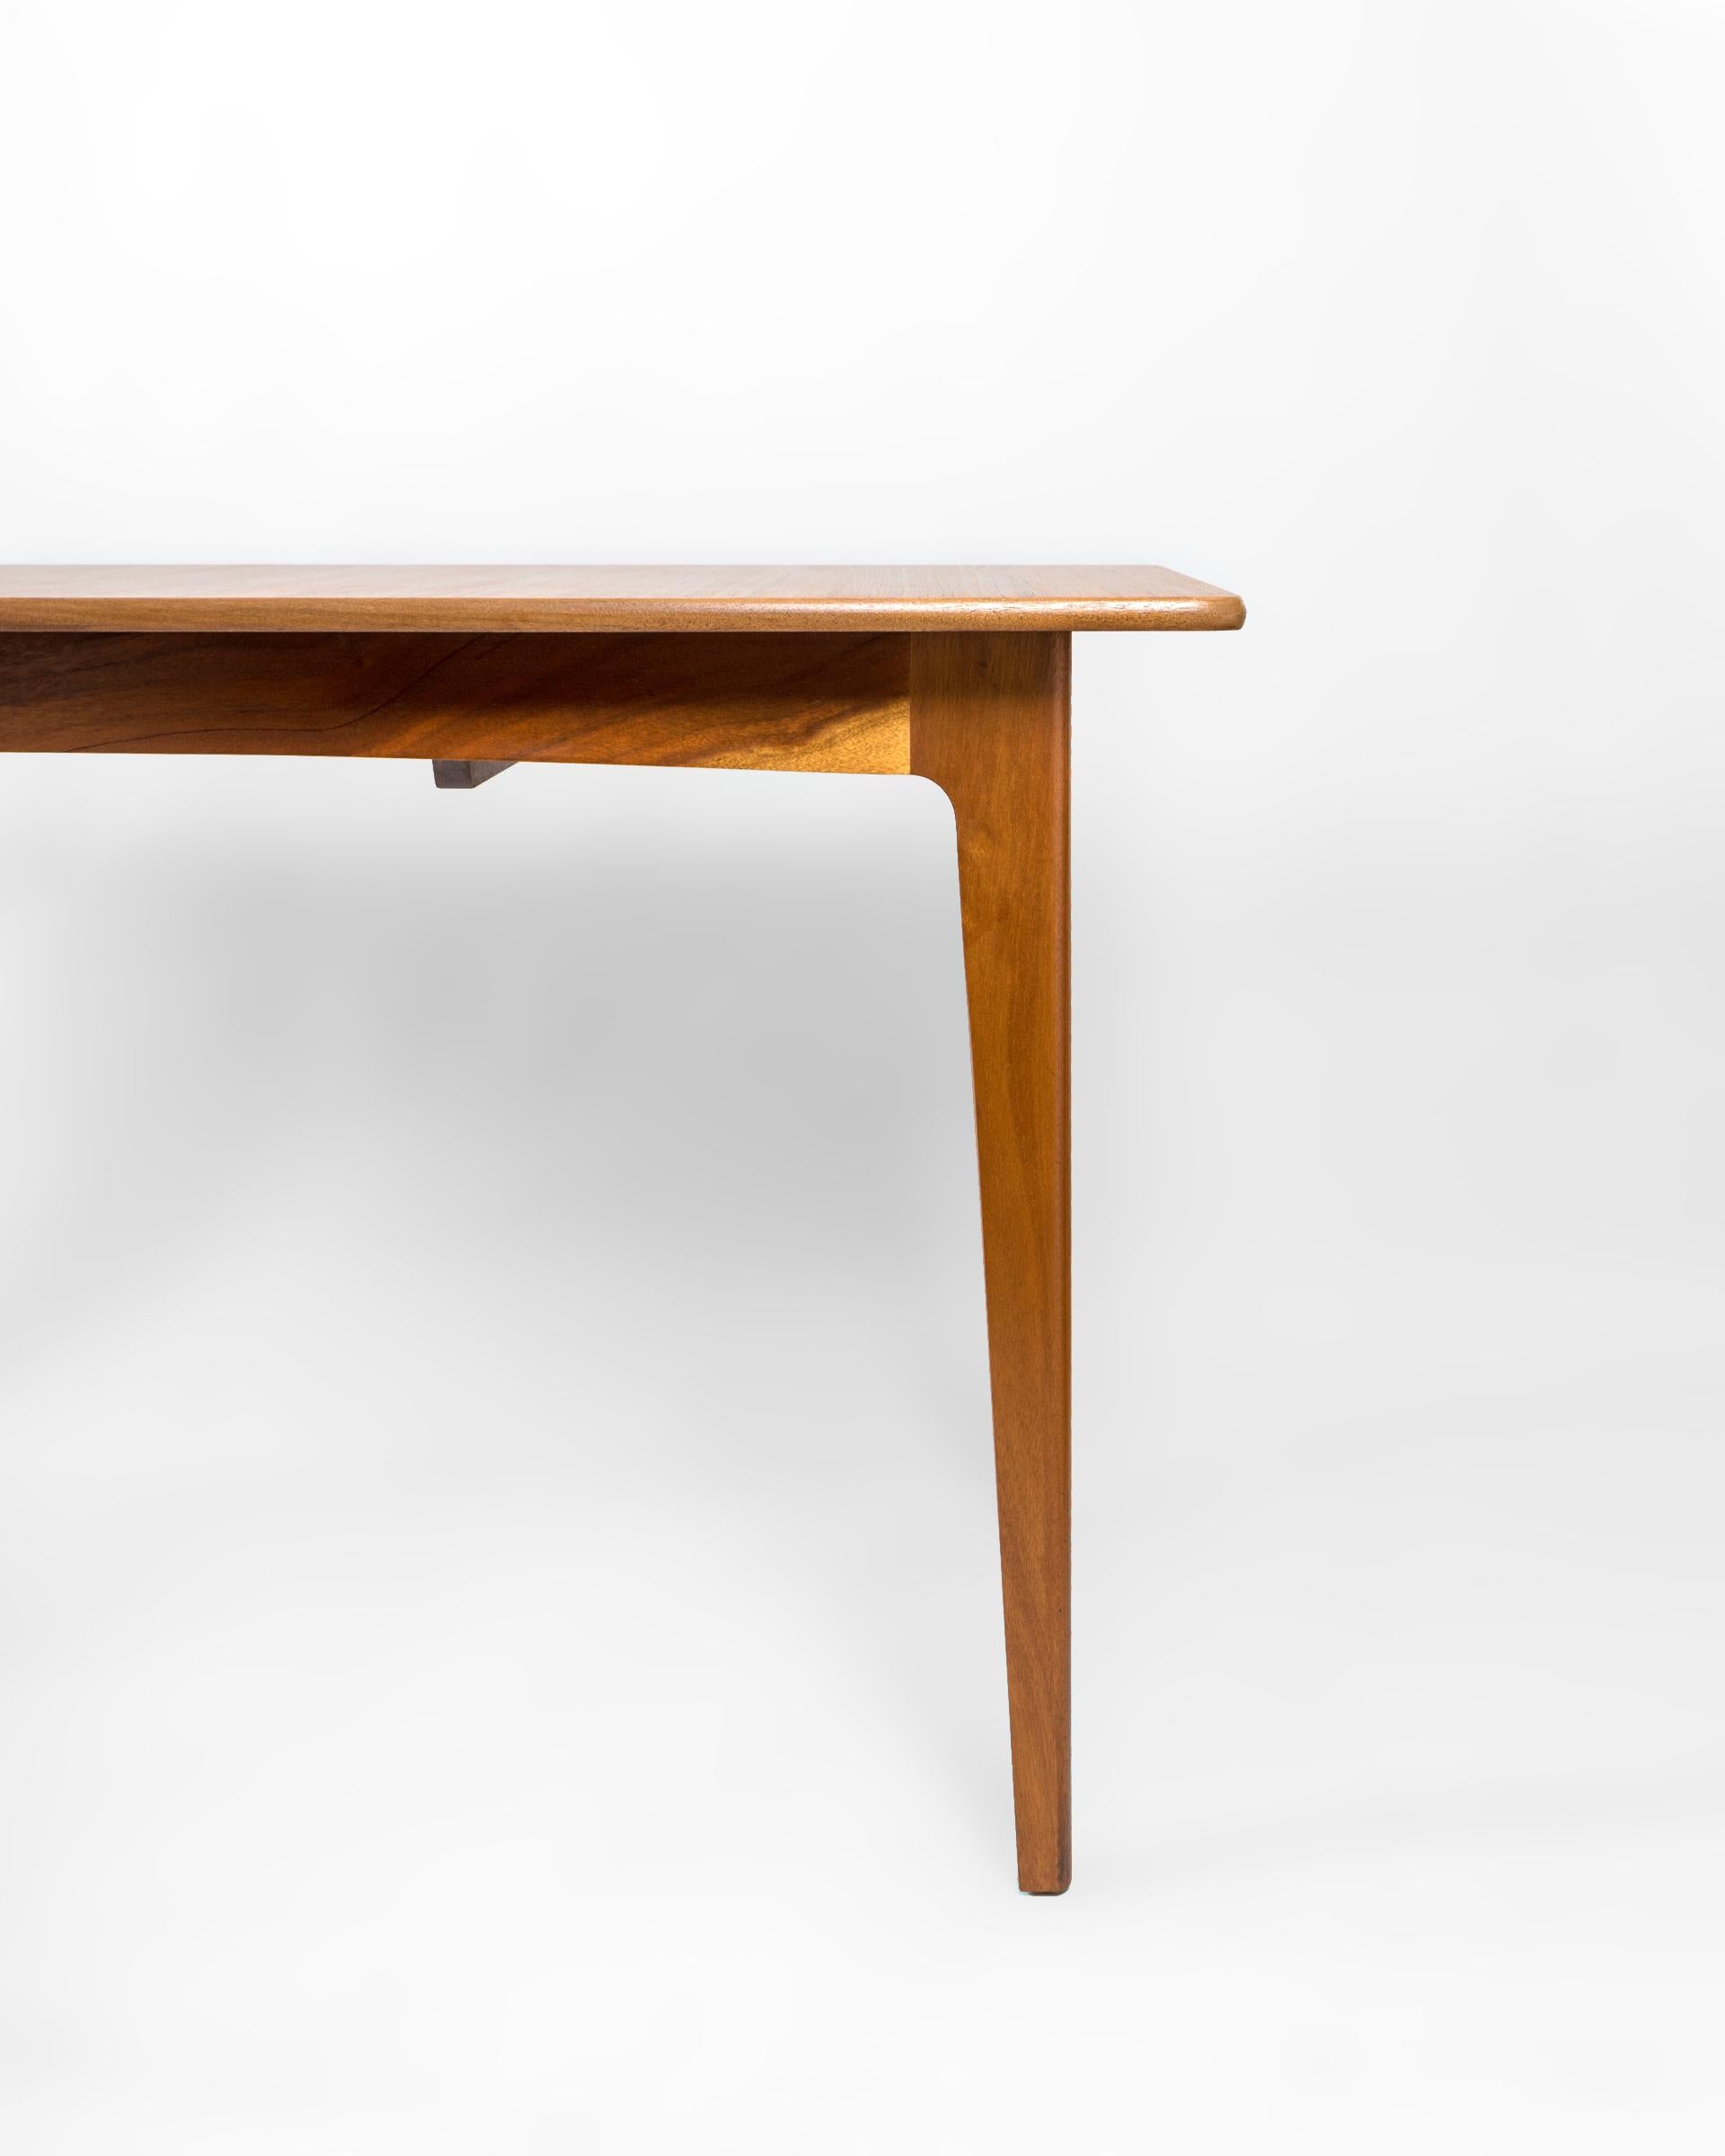 20th Century Mid Century Teak Extendable Dining Table, UK, circa 1960 For Sale